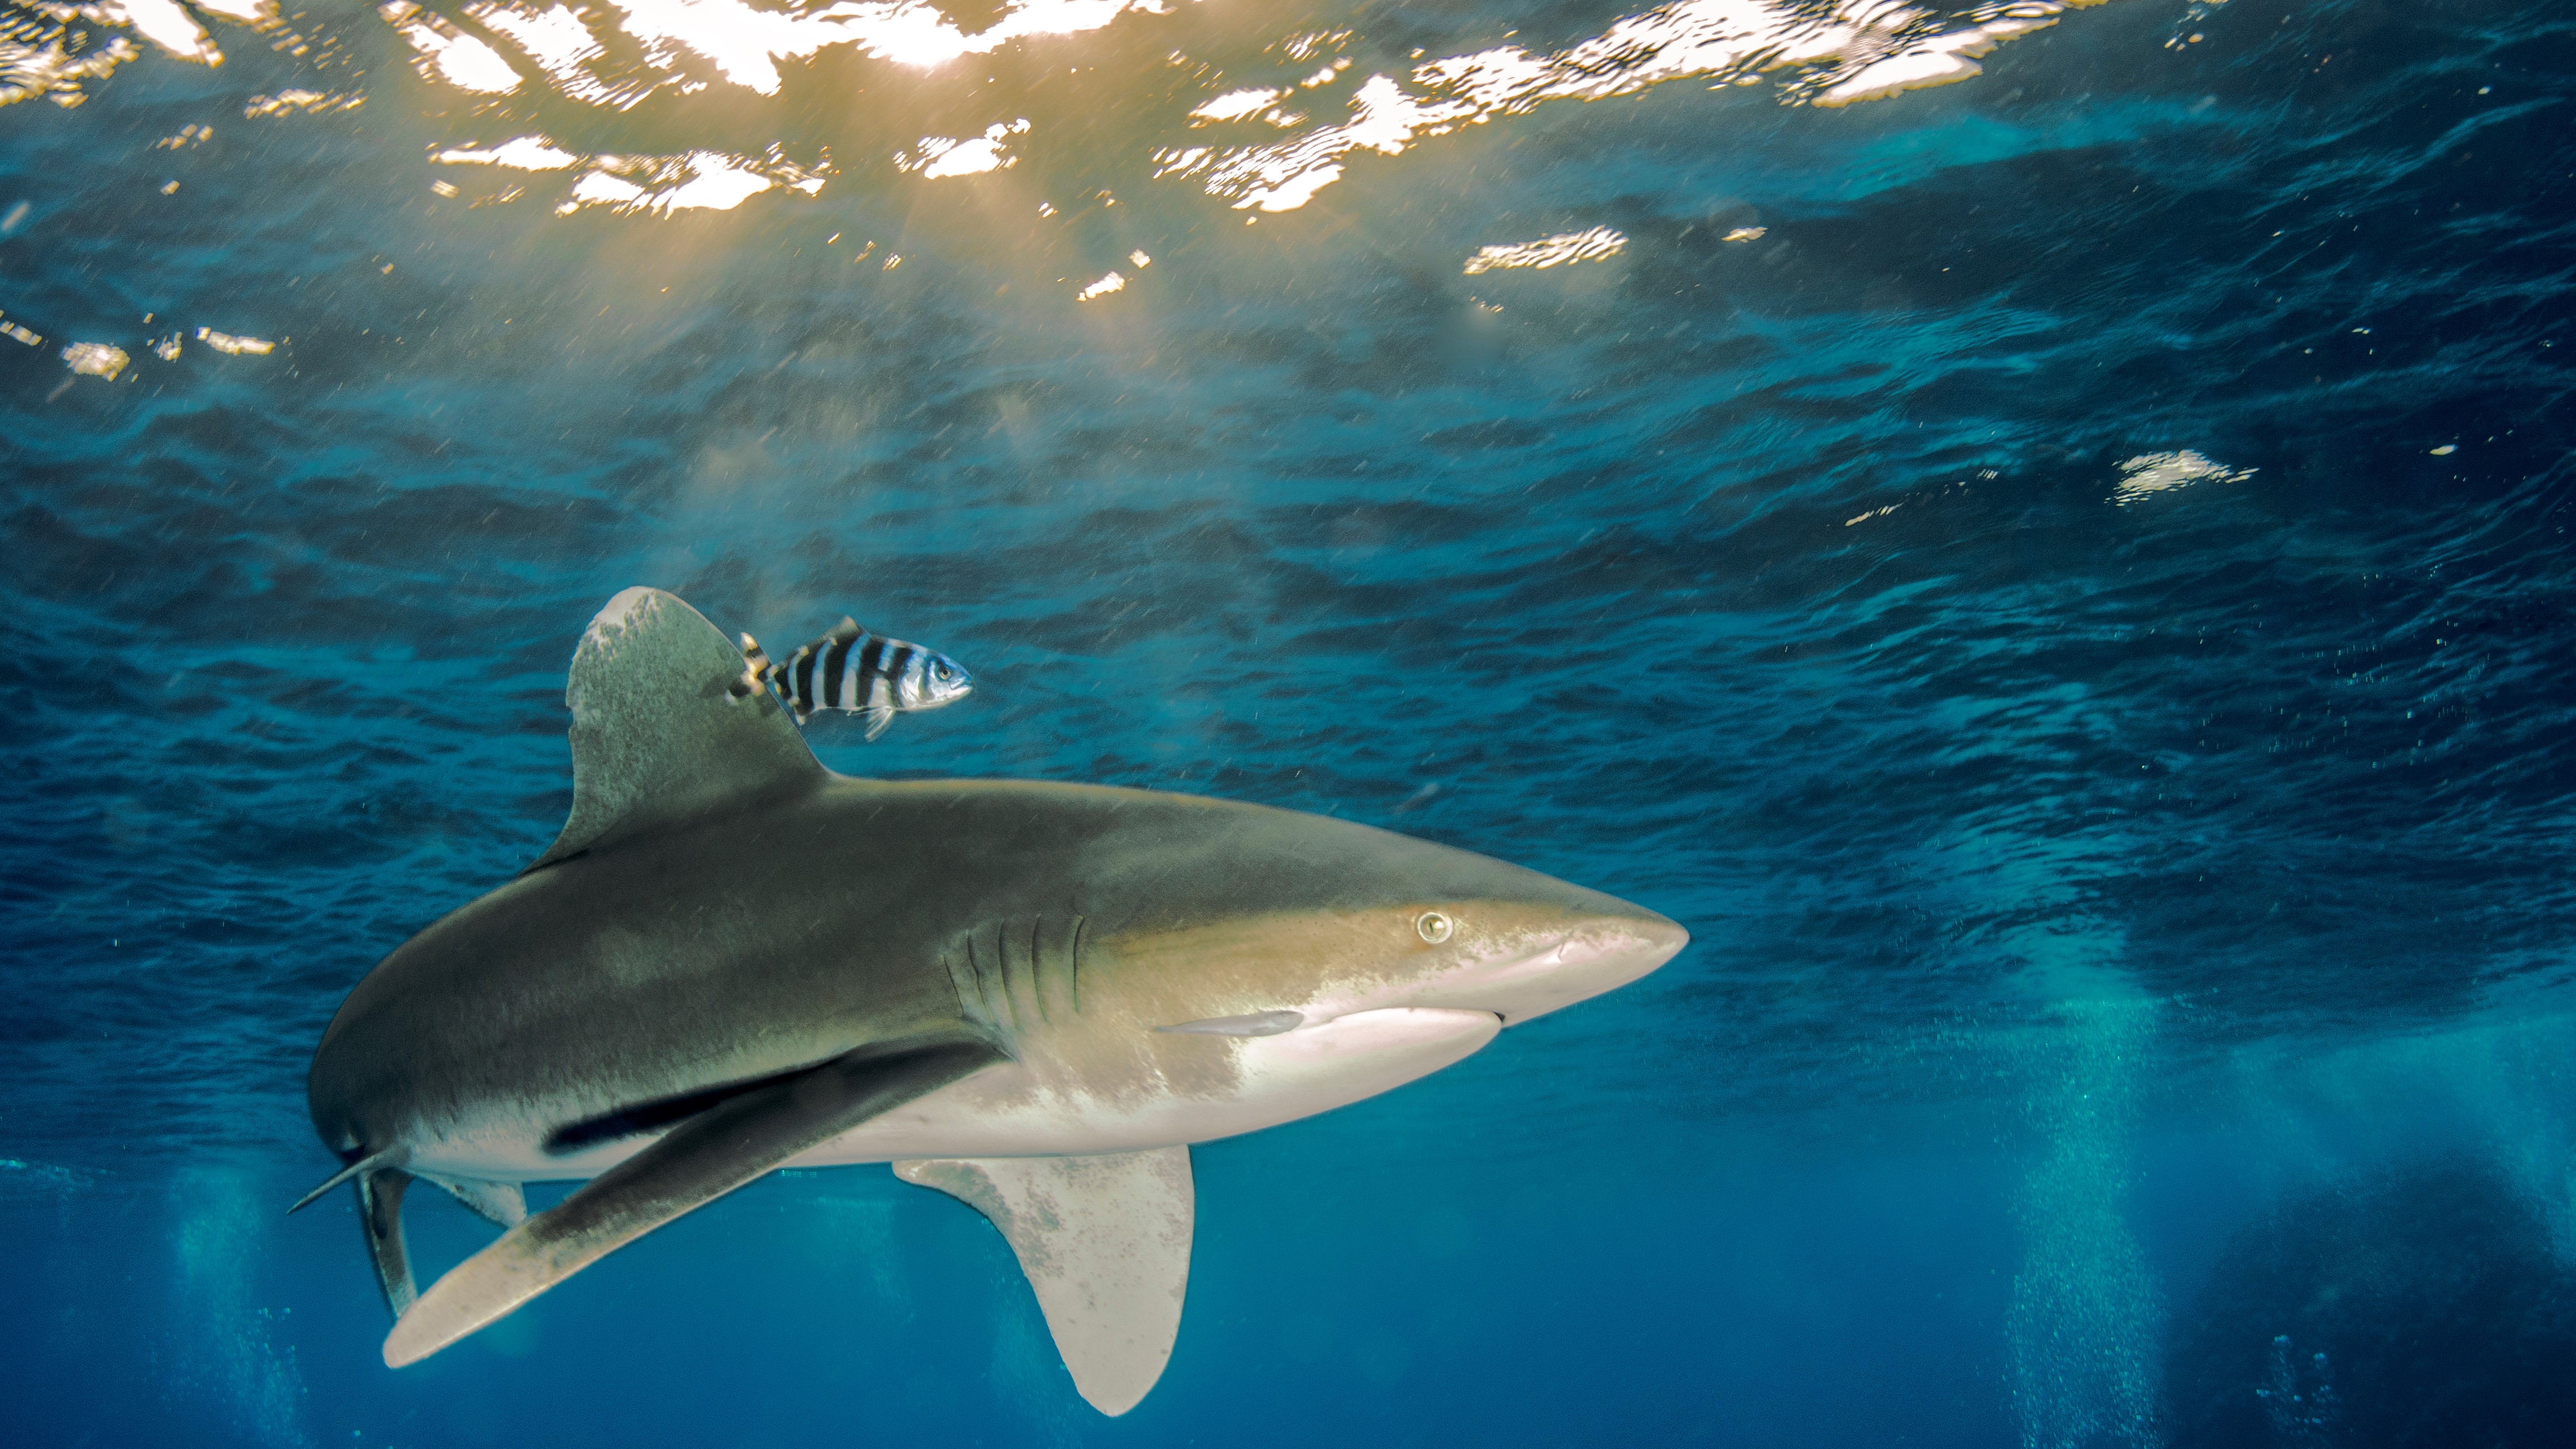 An oceanic whitetip shark swimming near the surface of the sea